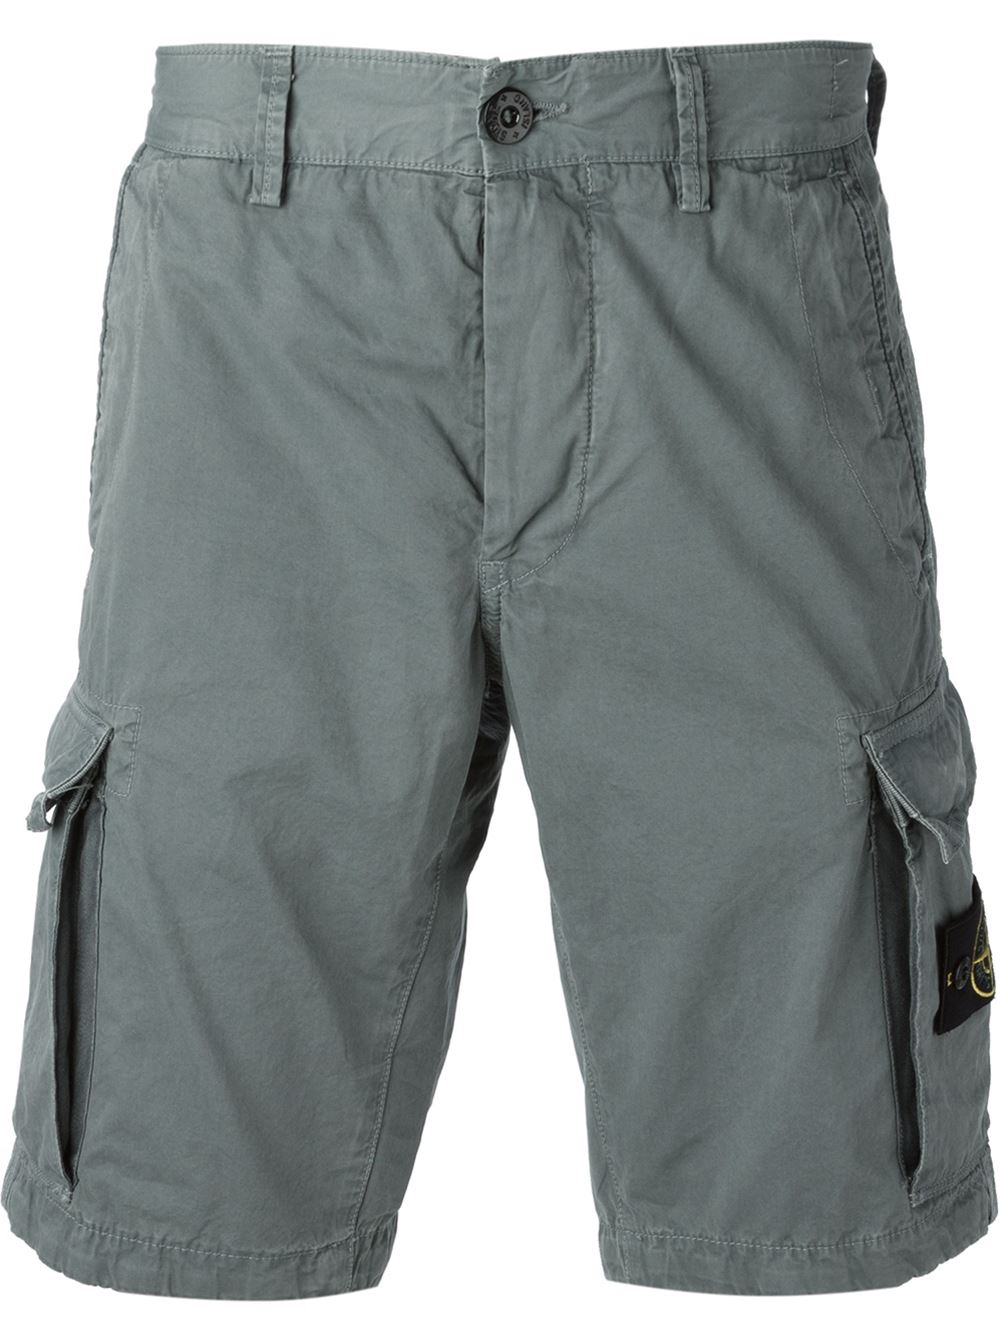 Lyst - Stone Island Cargo Shorts in Gray for Men